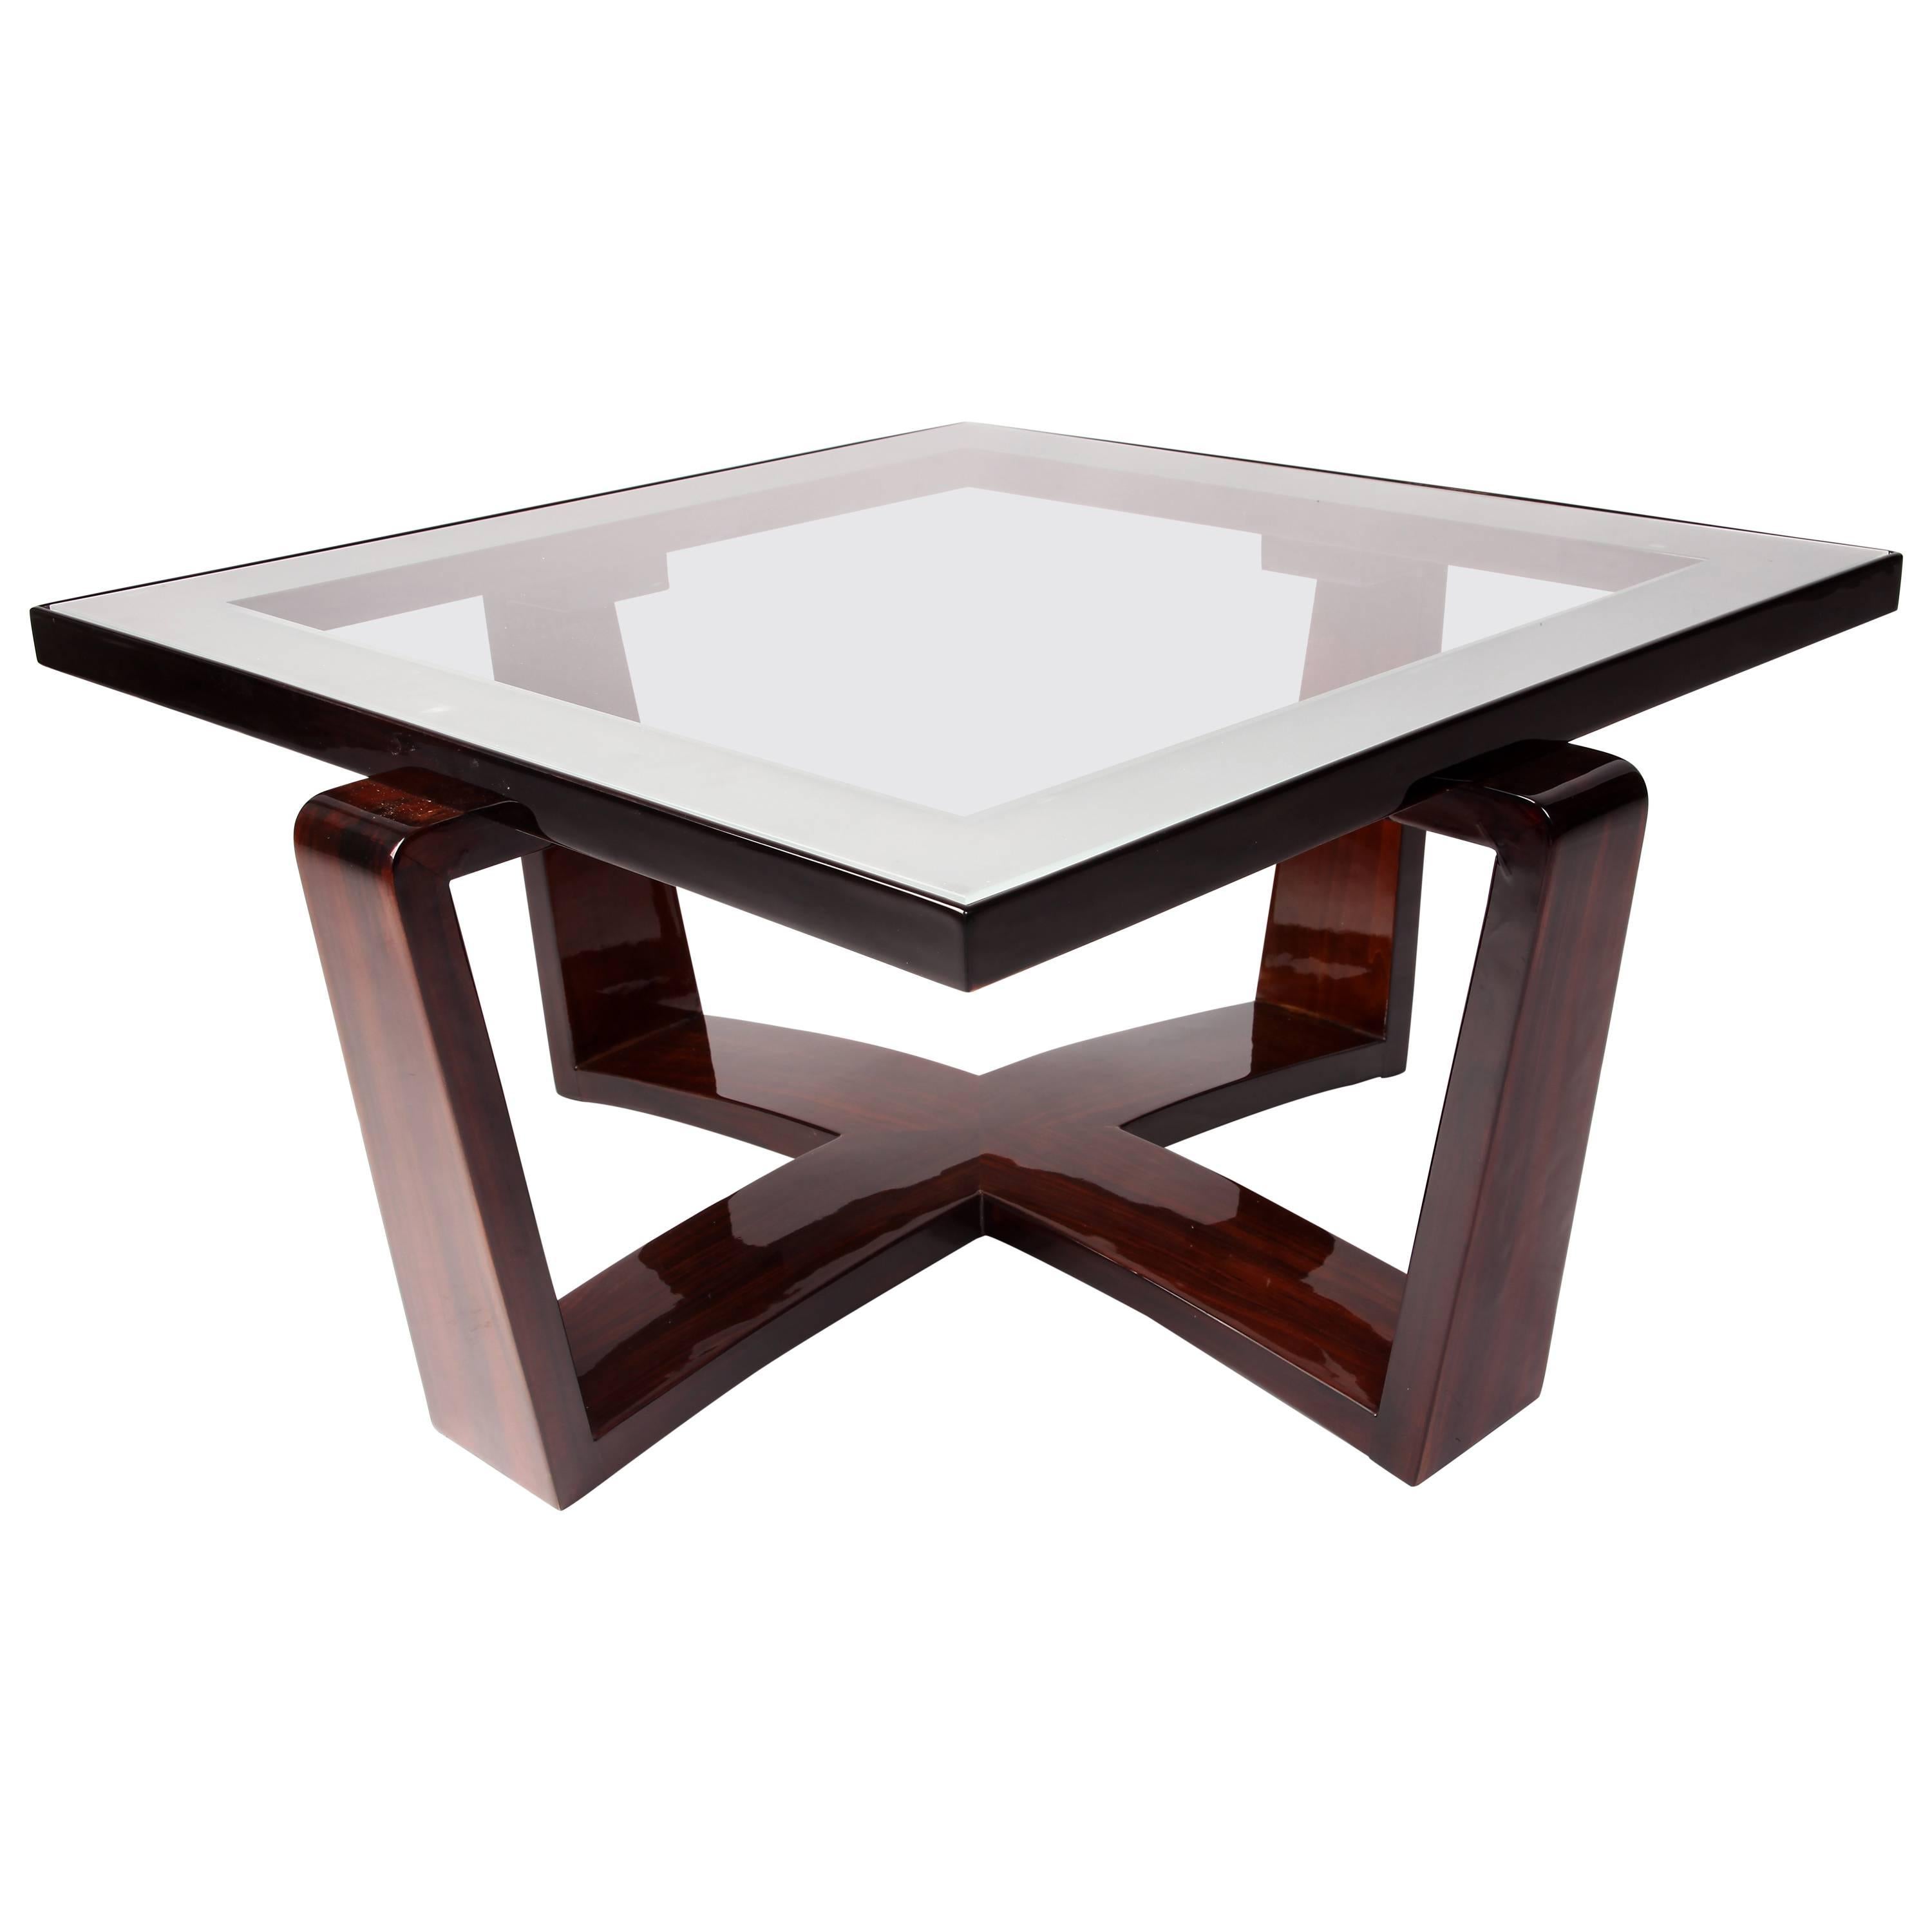 Modernist Bentwood Bauhaus Style Coffee Table with Glass Top